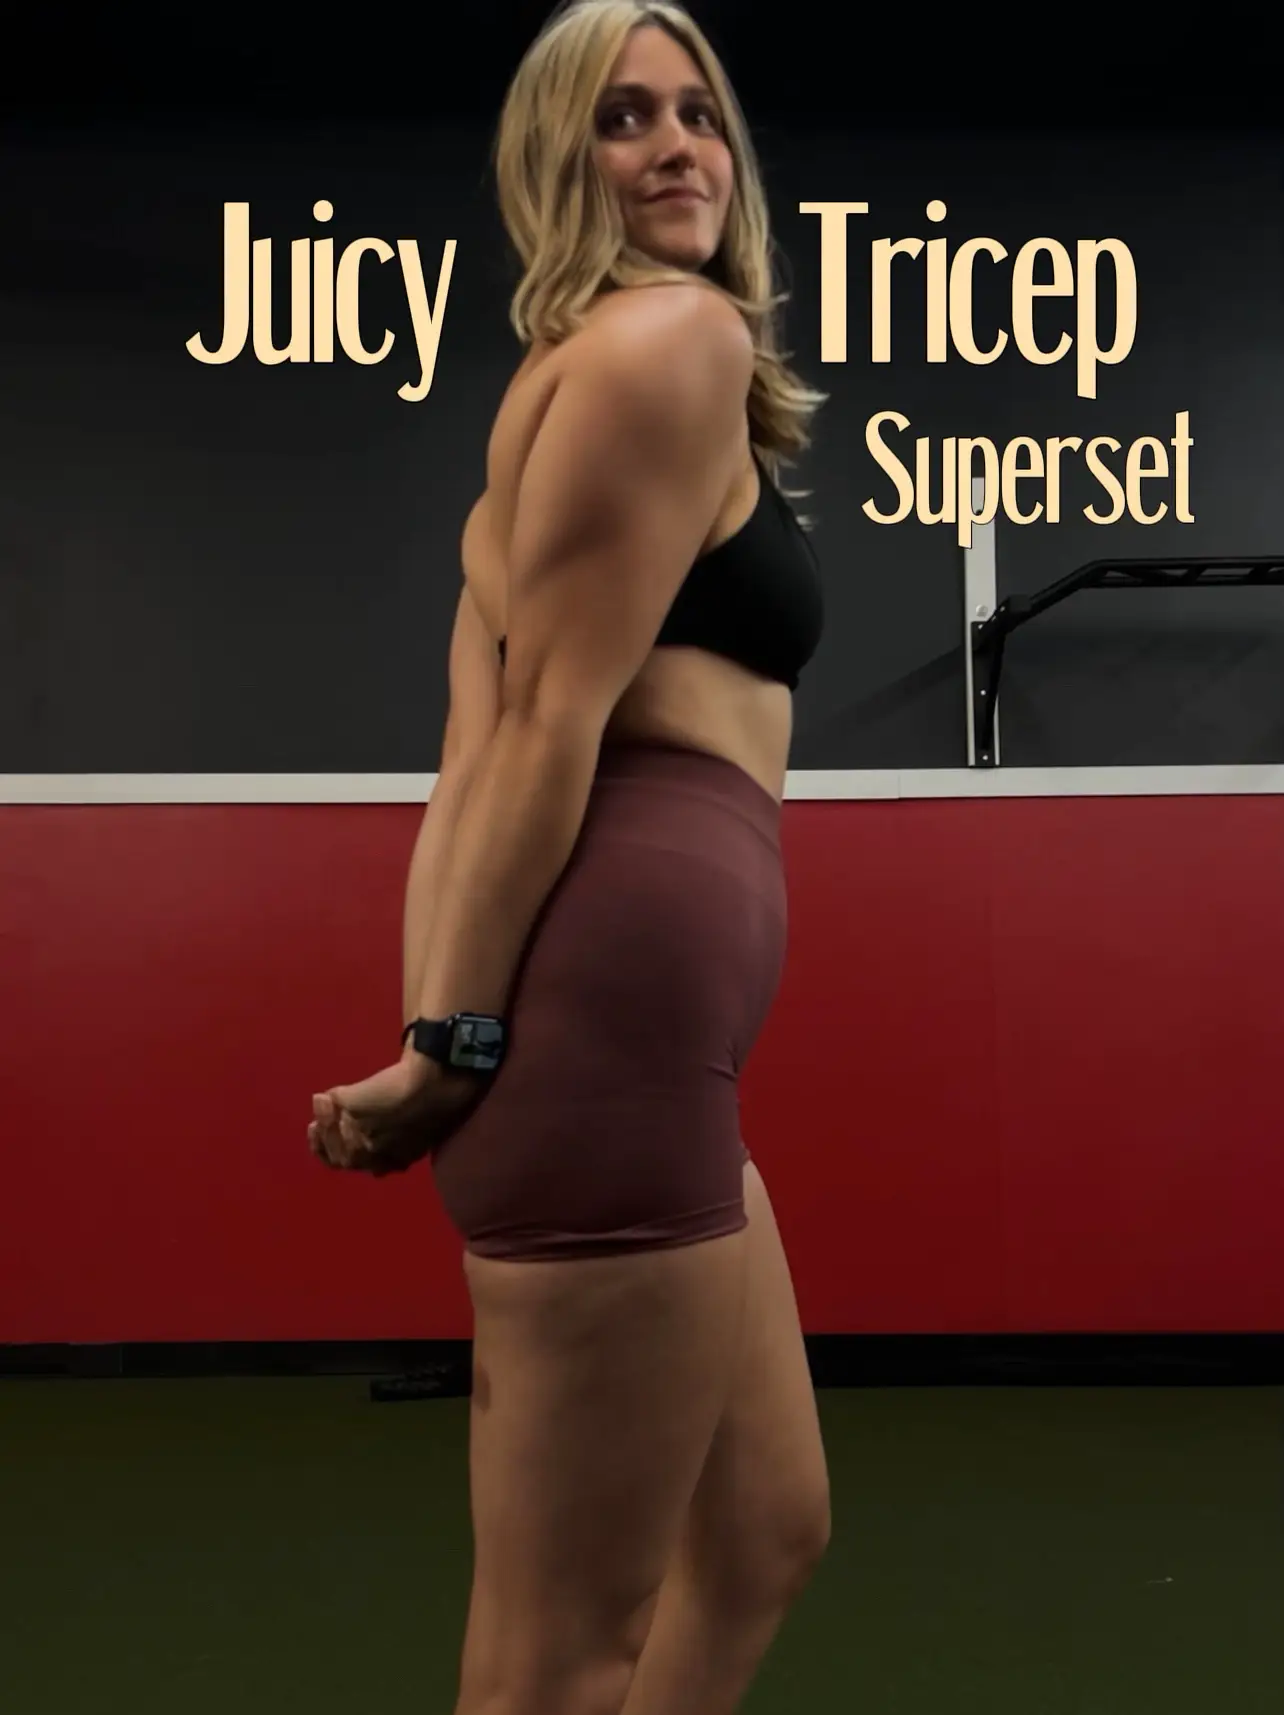 16 Minute Bicep & Tricep Super Set Workout - Resistance Band Exercises